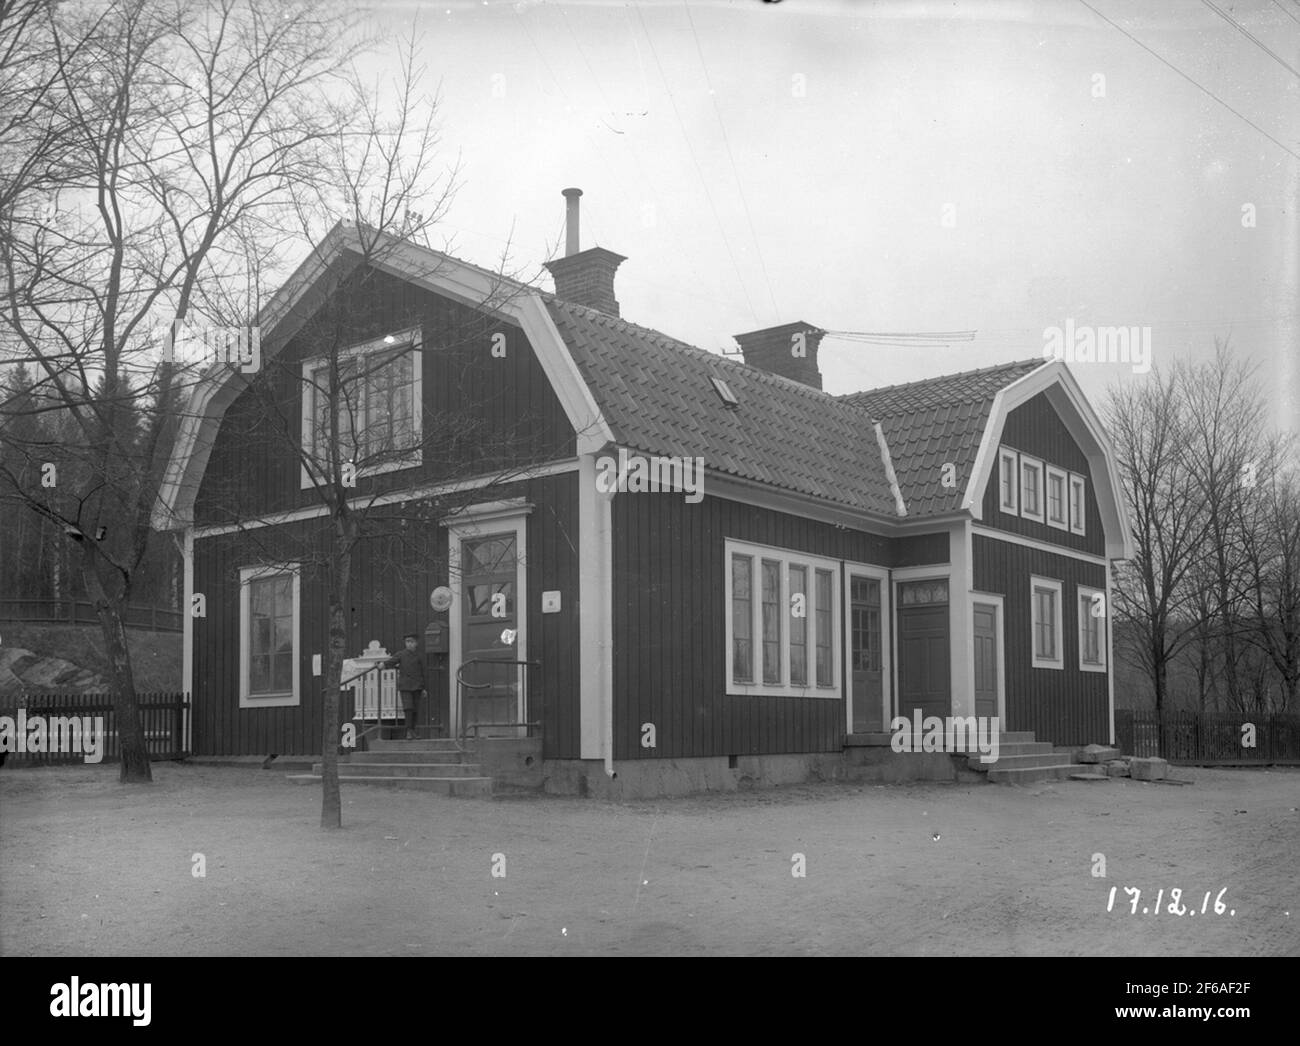 Station was built in 1888. Little wooden station house, red colored with white outfit. Model for kantorps station. The station house was built in 1906, and remodeled in 1916. In 1916, passenger tunnel was built, which was completed in 1920, in 1924, which year also platform lock was introduced. In 1934, the safety facility was reversed in connection with the introduction of Aut. Line blocks. The buck was remodeled in 1915 in connection with the double track building Stock Photo